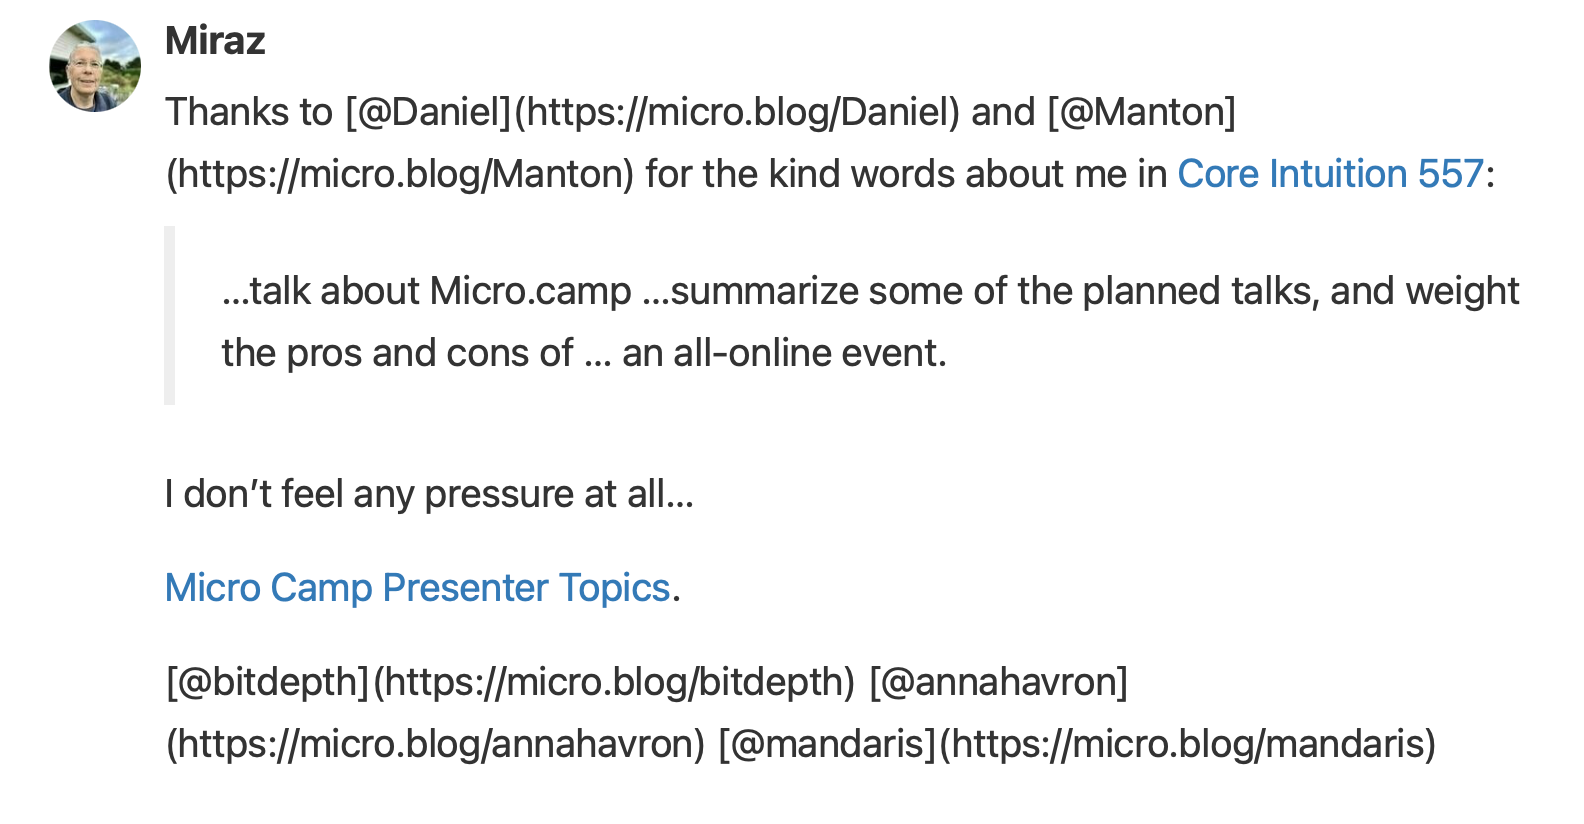 Published Post includes MarkDown instead of links.